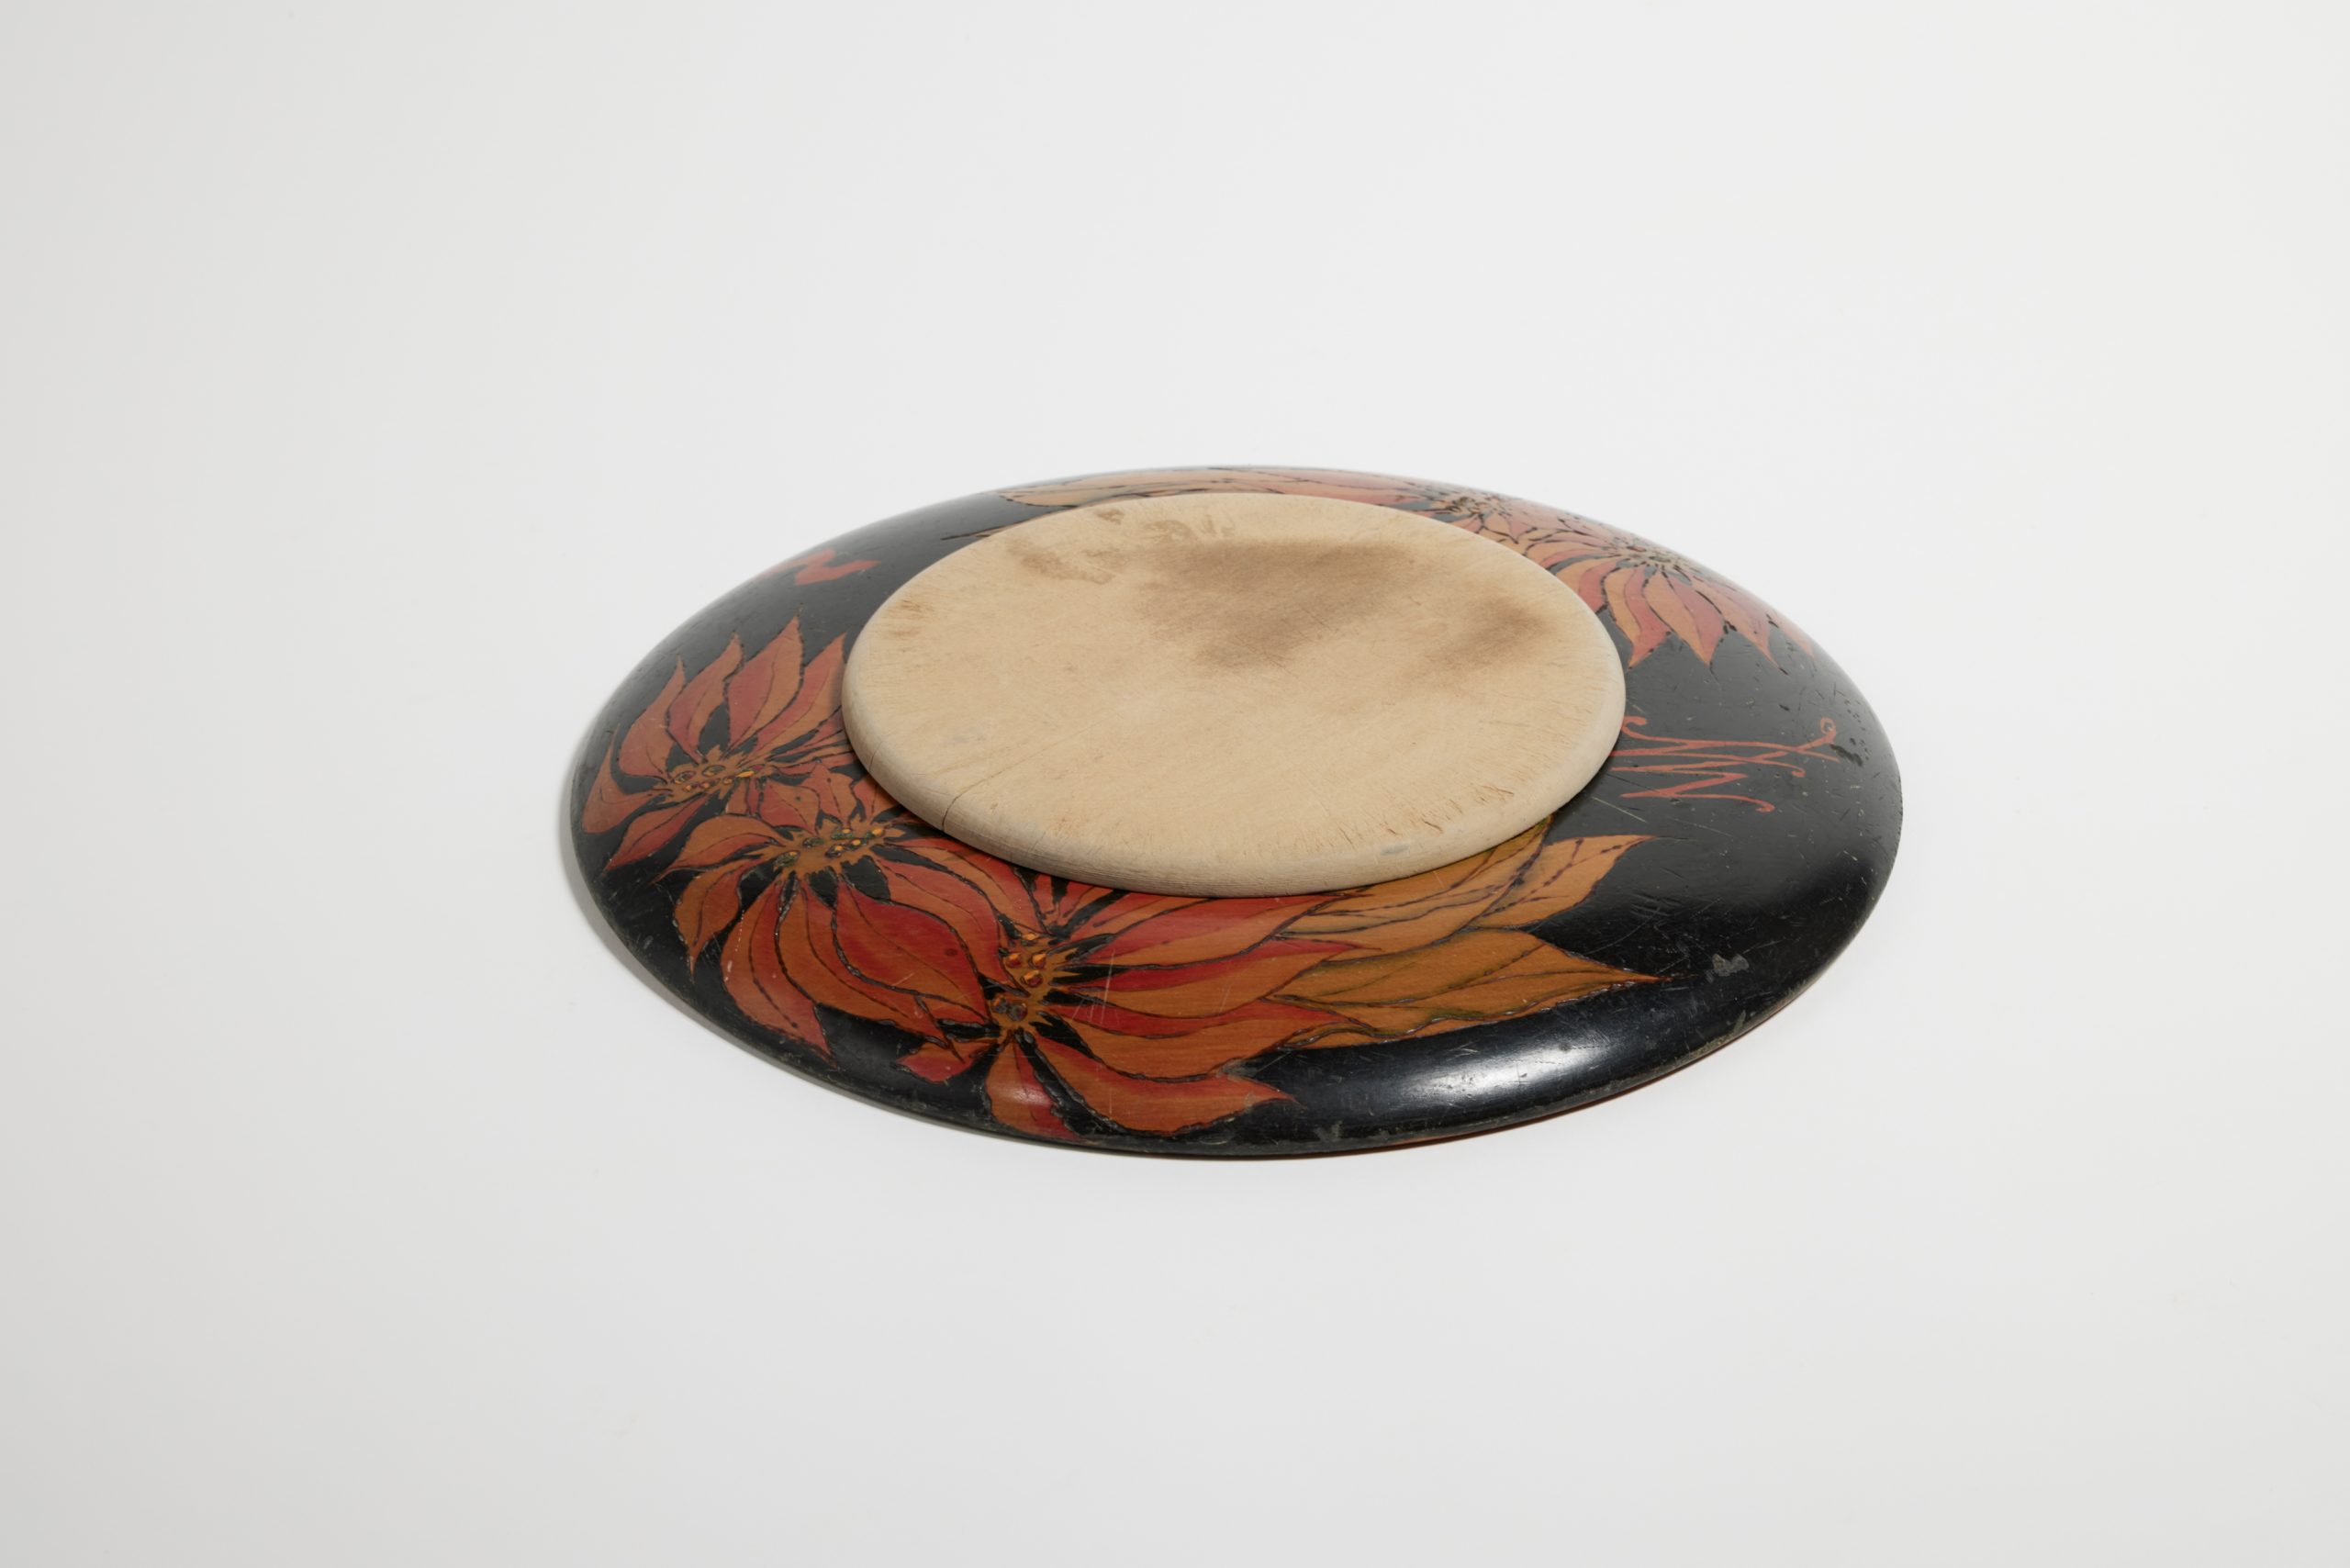 Circular breadboard with chopping board; design of poinsettia flowers burned into the wood